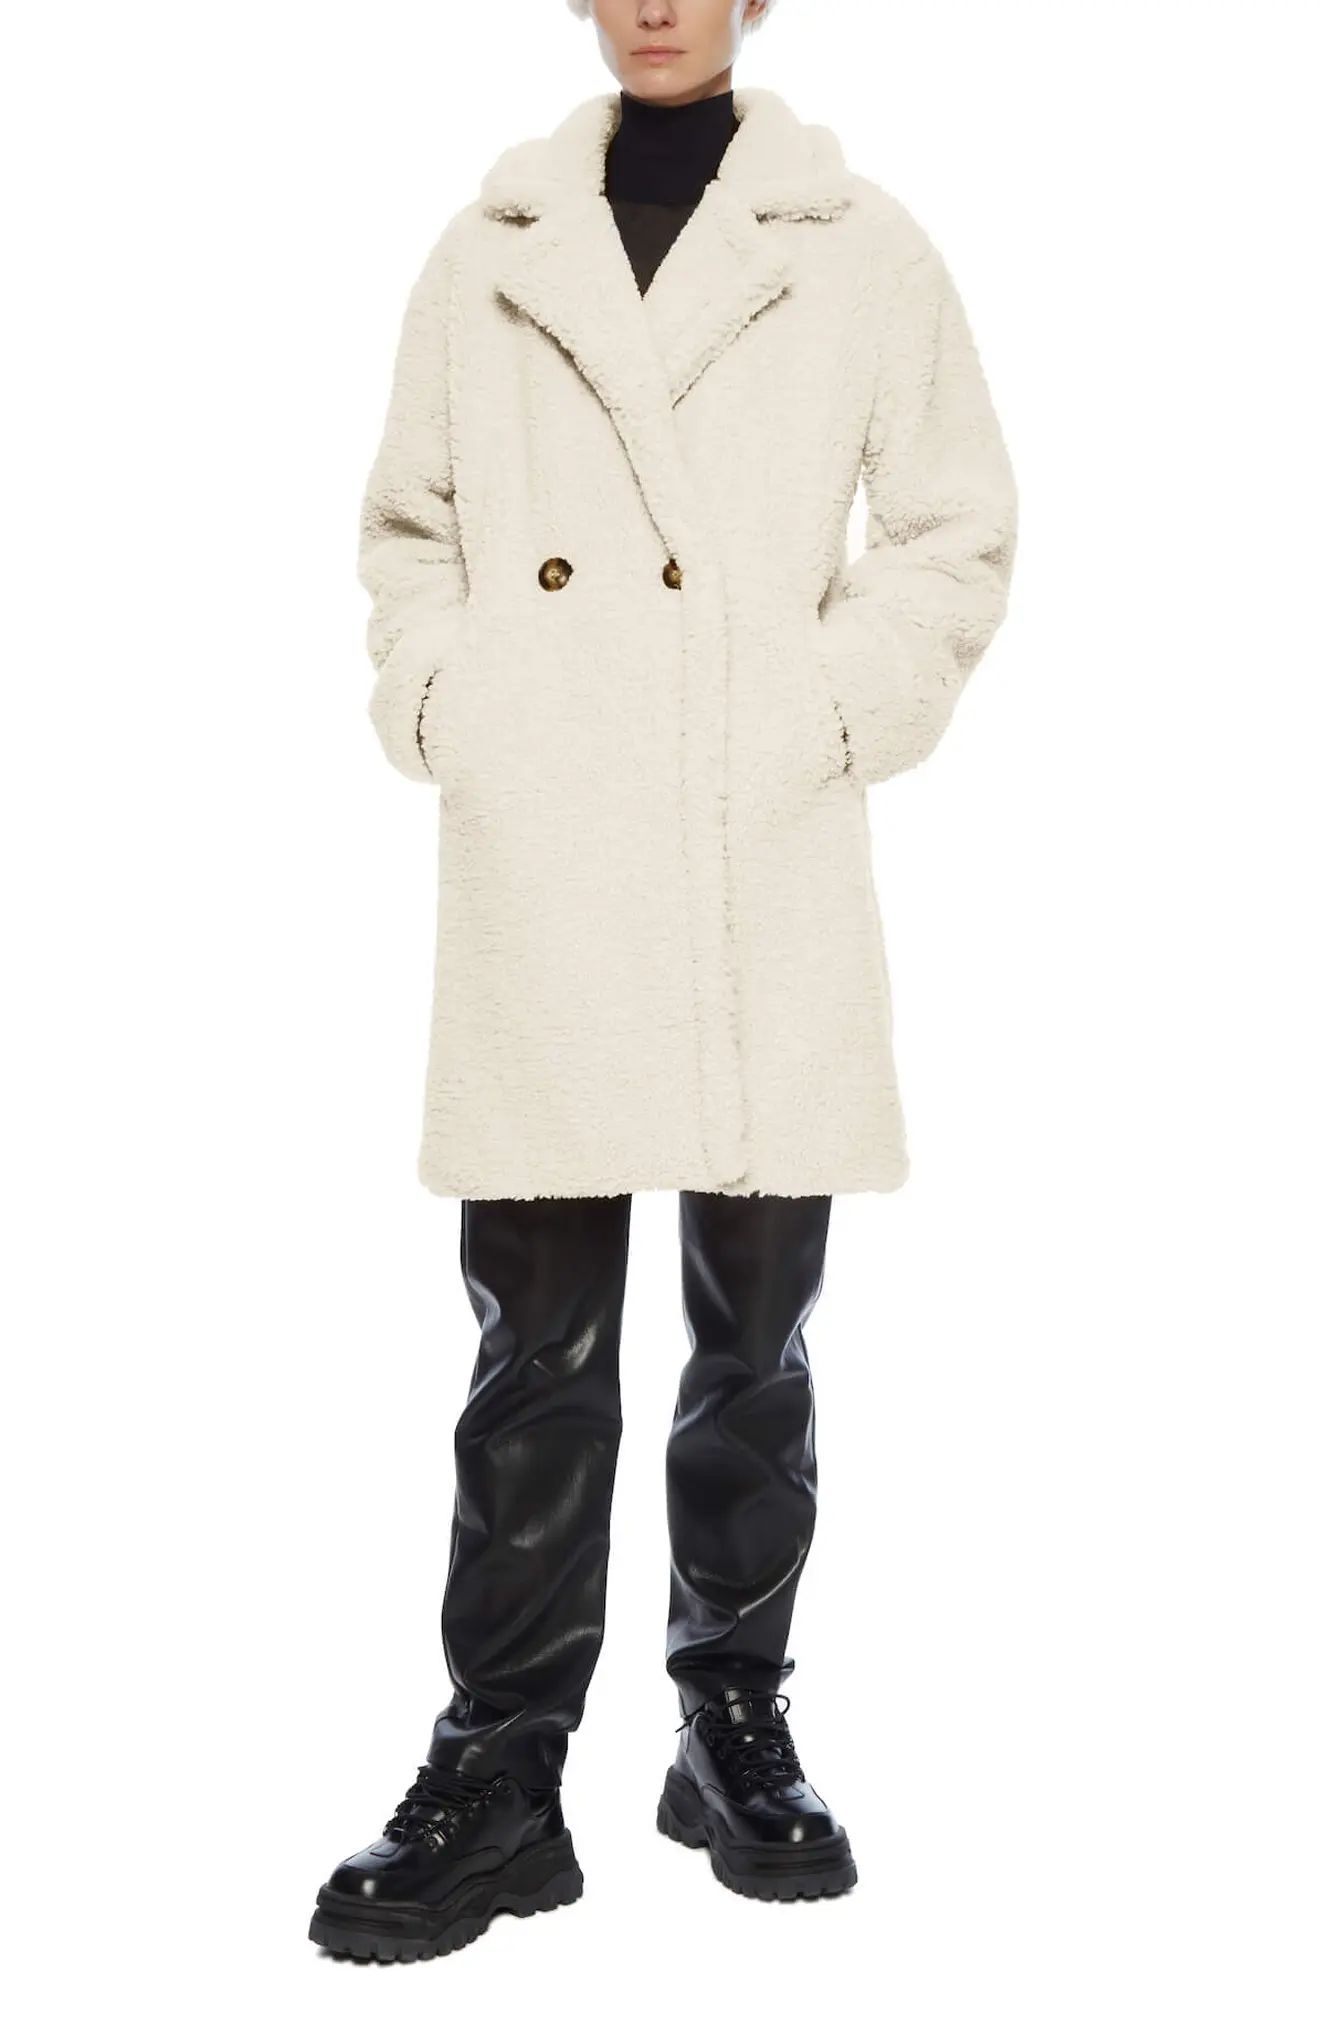 Apparis Anouck Faux Shearling Coat in Ivory at Nordstrom, Size Xx-Small | Nordstrom